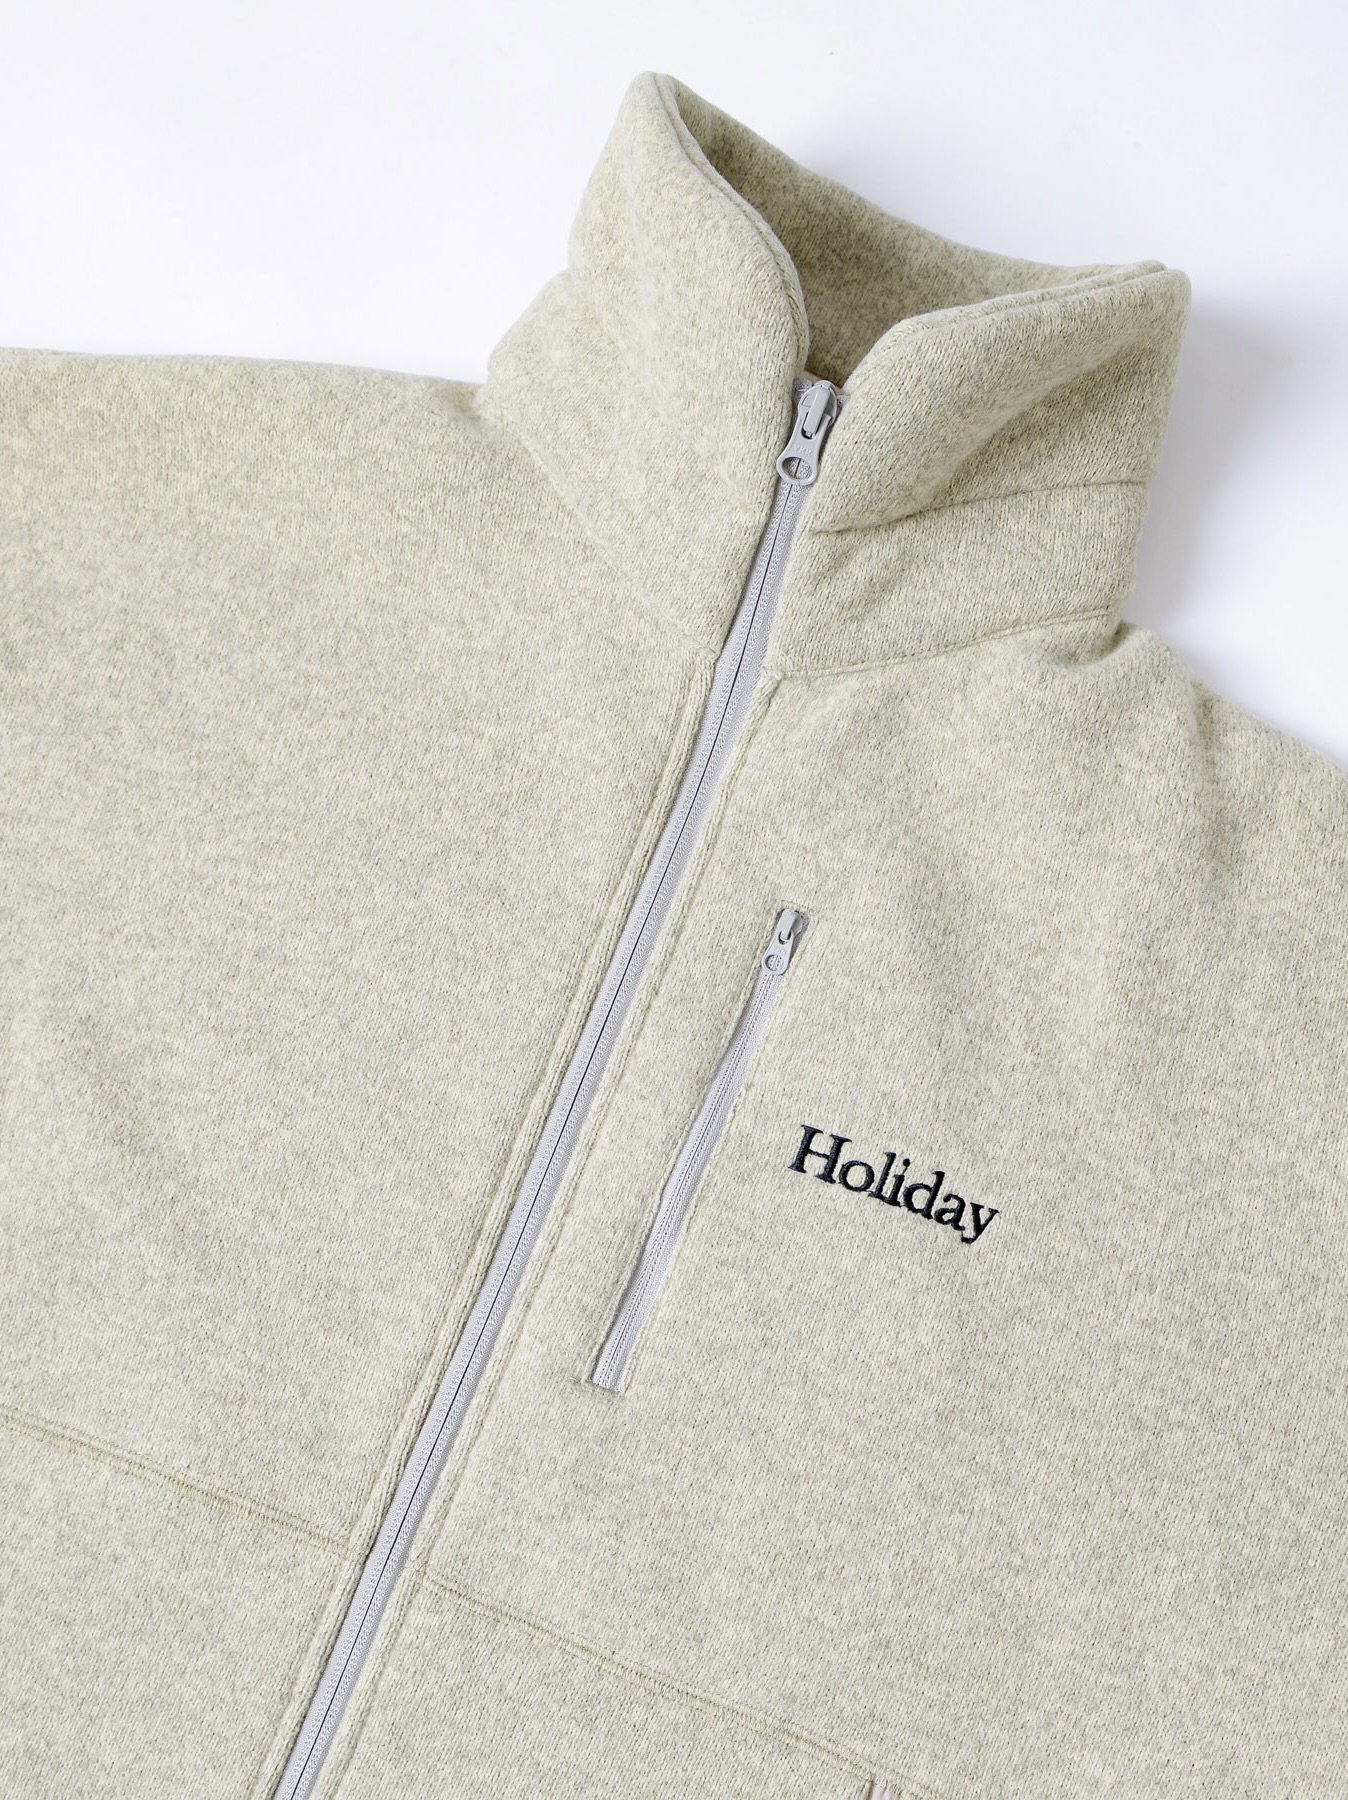 HOLIDAY ホリデイ 22aw “THERMAL PRO FLEECE ZIP UP JACKET” ” THERMAL